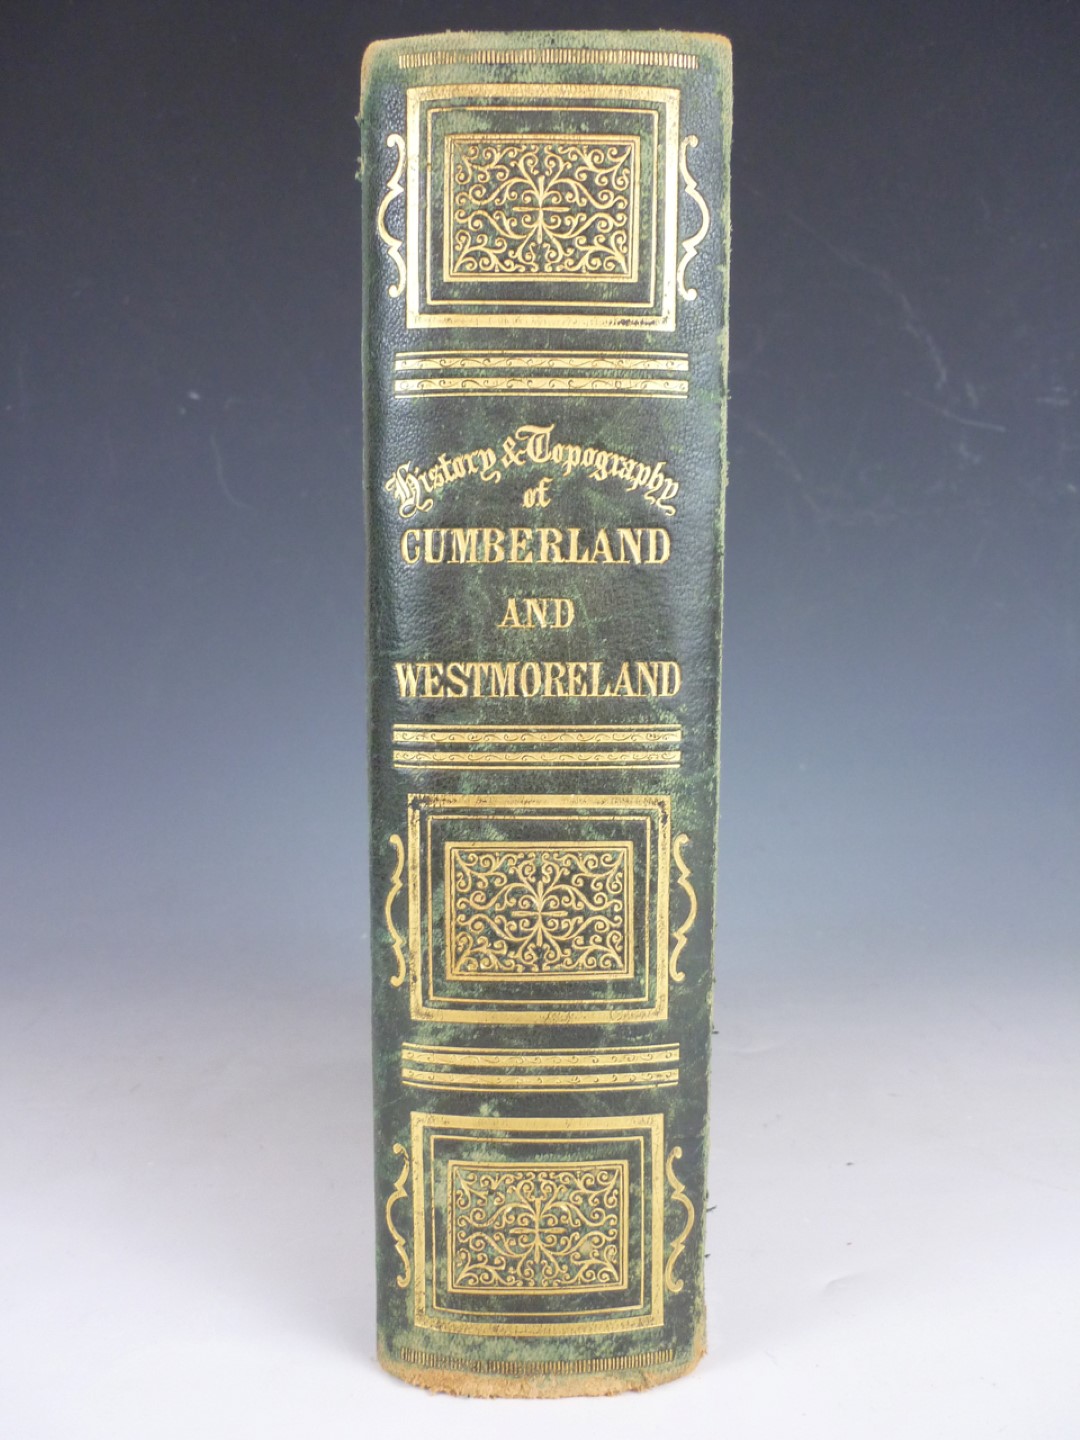 Whellan, The History and Topography of the Counties of Cumberland and Westmoreland, Whellan & Co, - Image 2 of 3